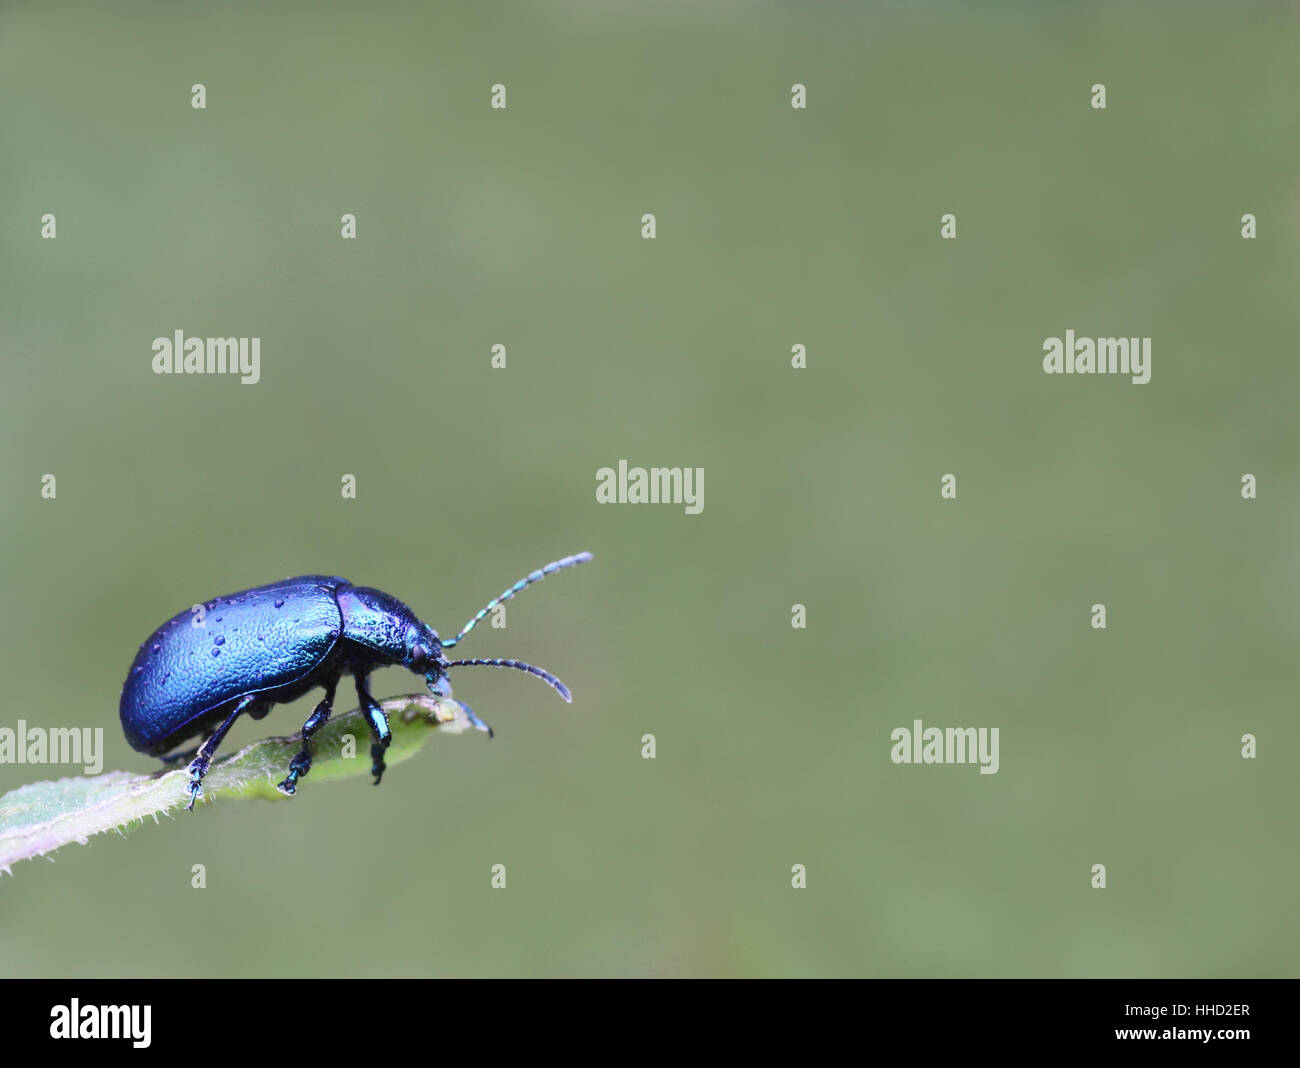 blue, south tyrol, beetle, azure, area of freedom, blue, insect, scrabble, Stock Photo